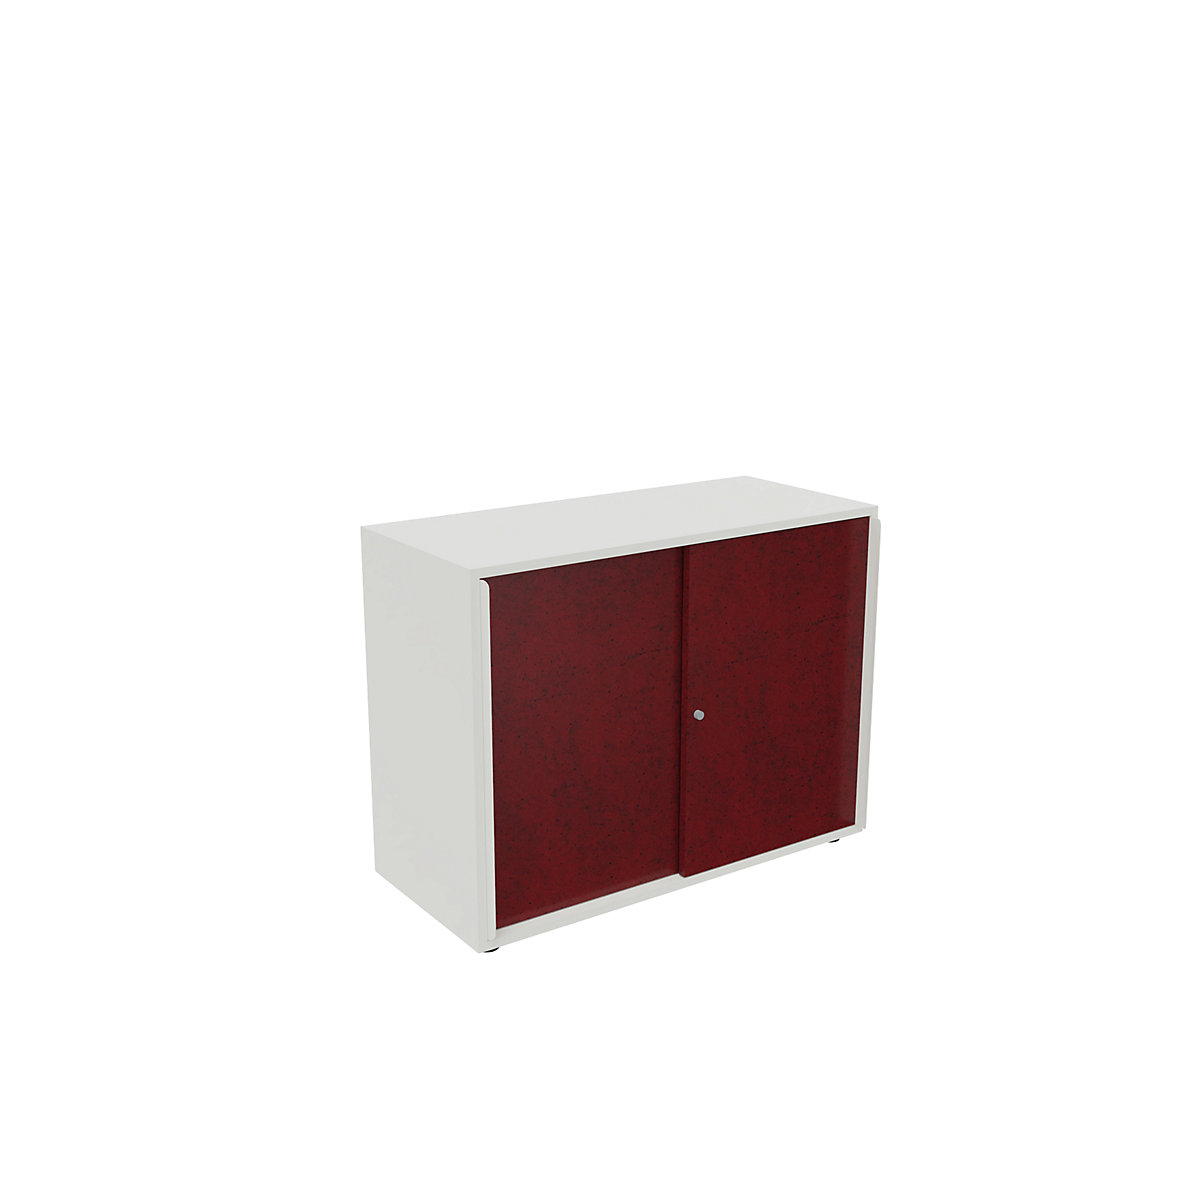 NEOTEX sliding door cupboard with acoustic front